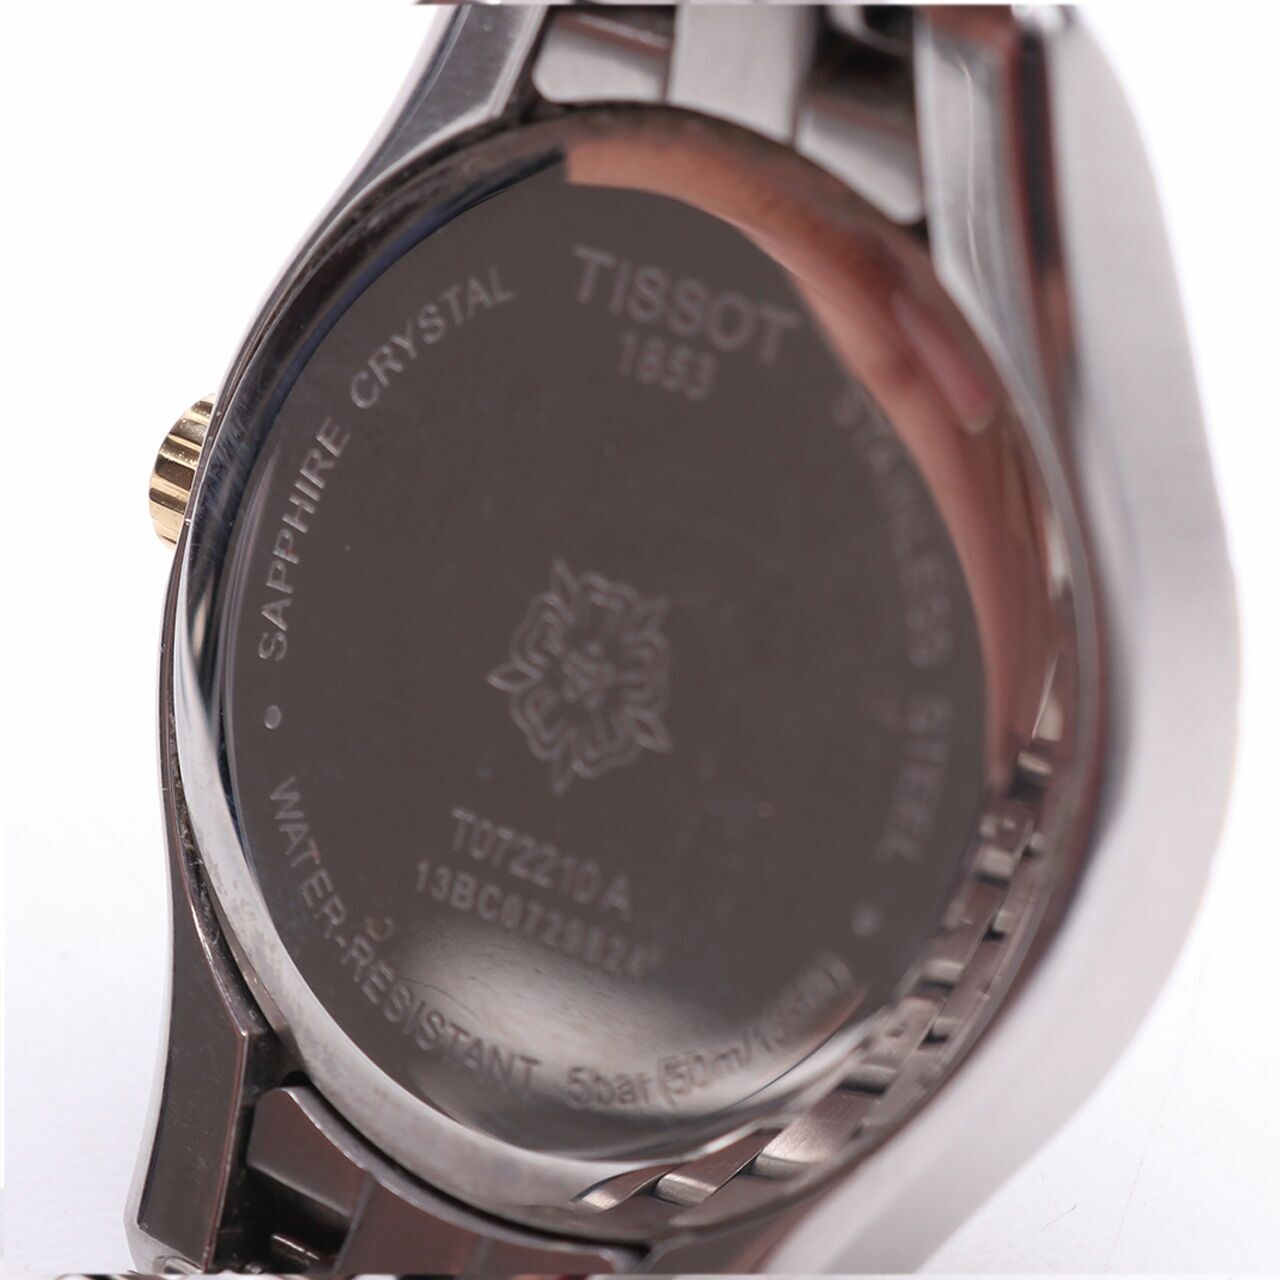 Tissot T-Lady Silver Dial Two-tone Gold Watch 